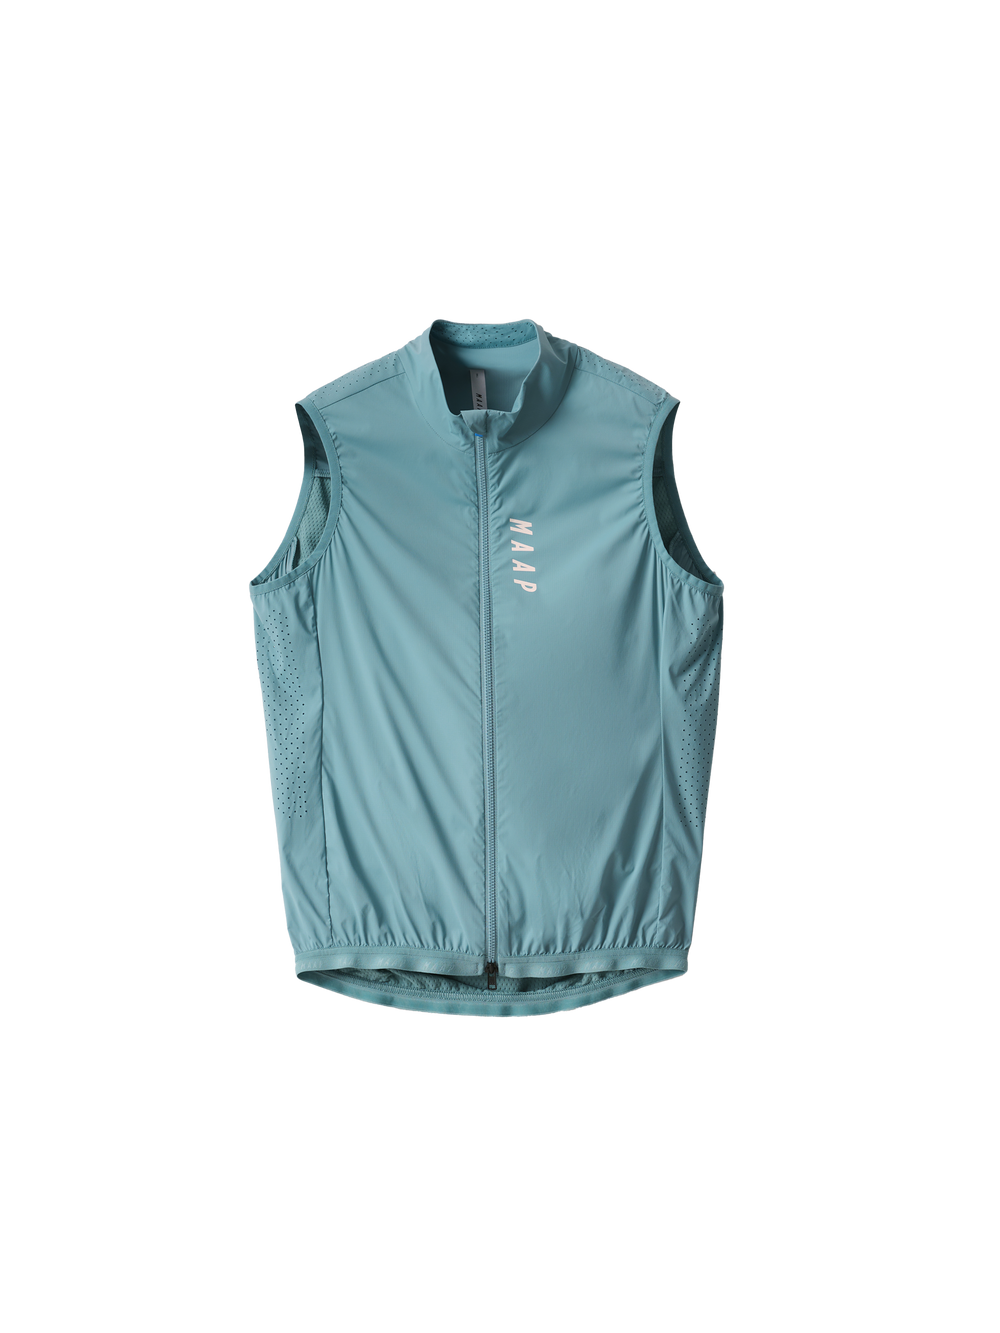 Product Image for Draft Team Vest